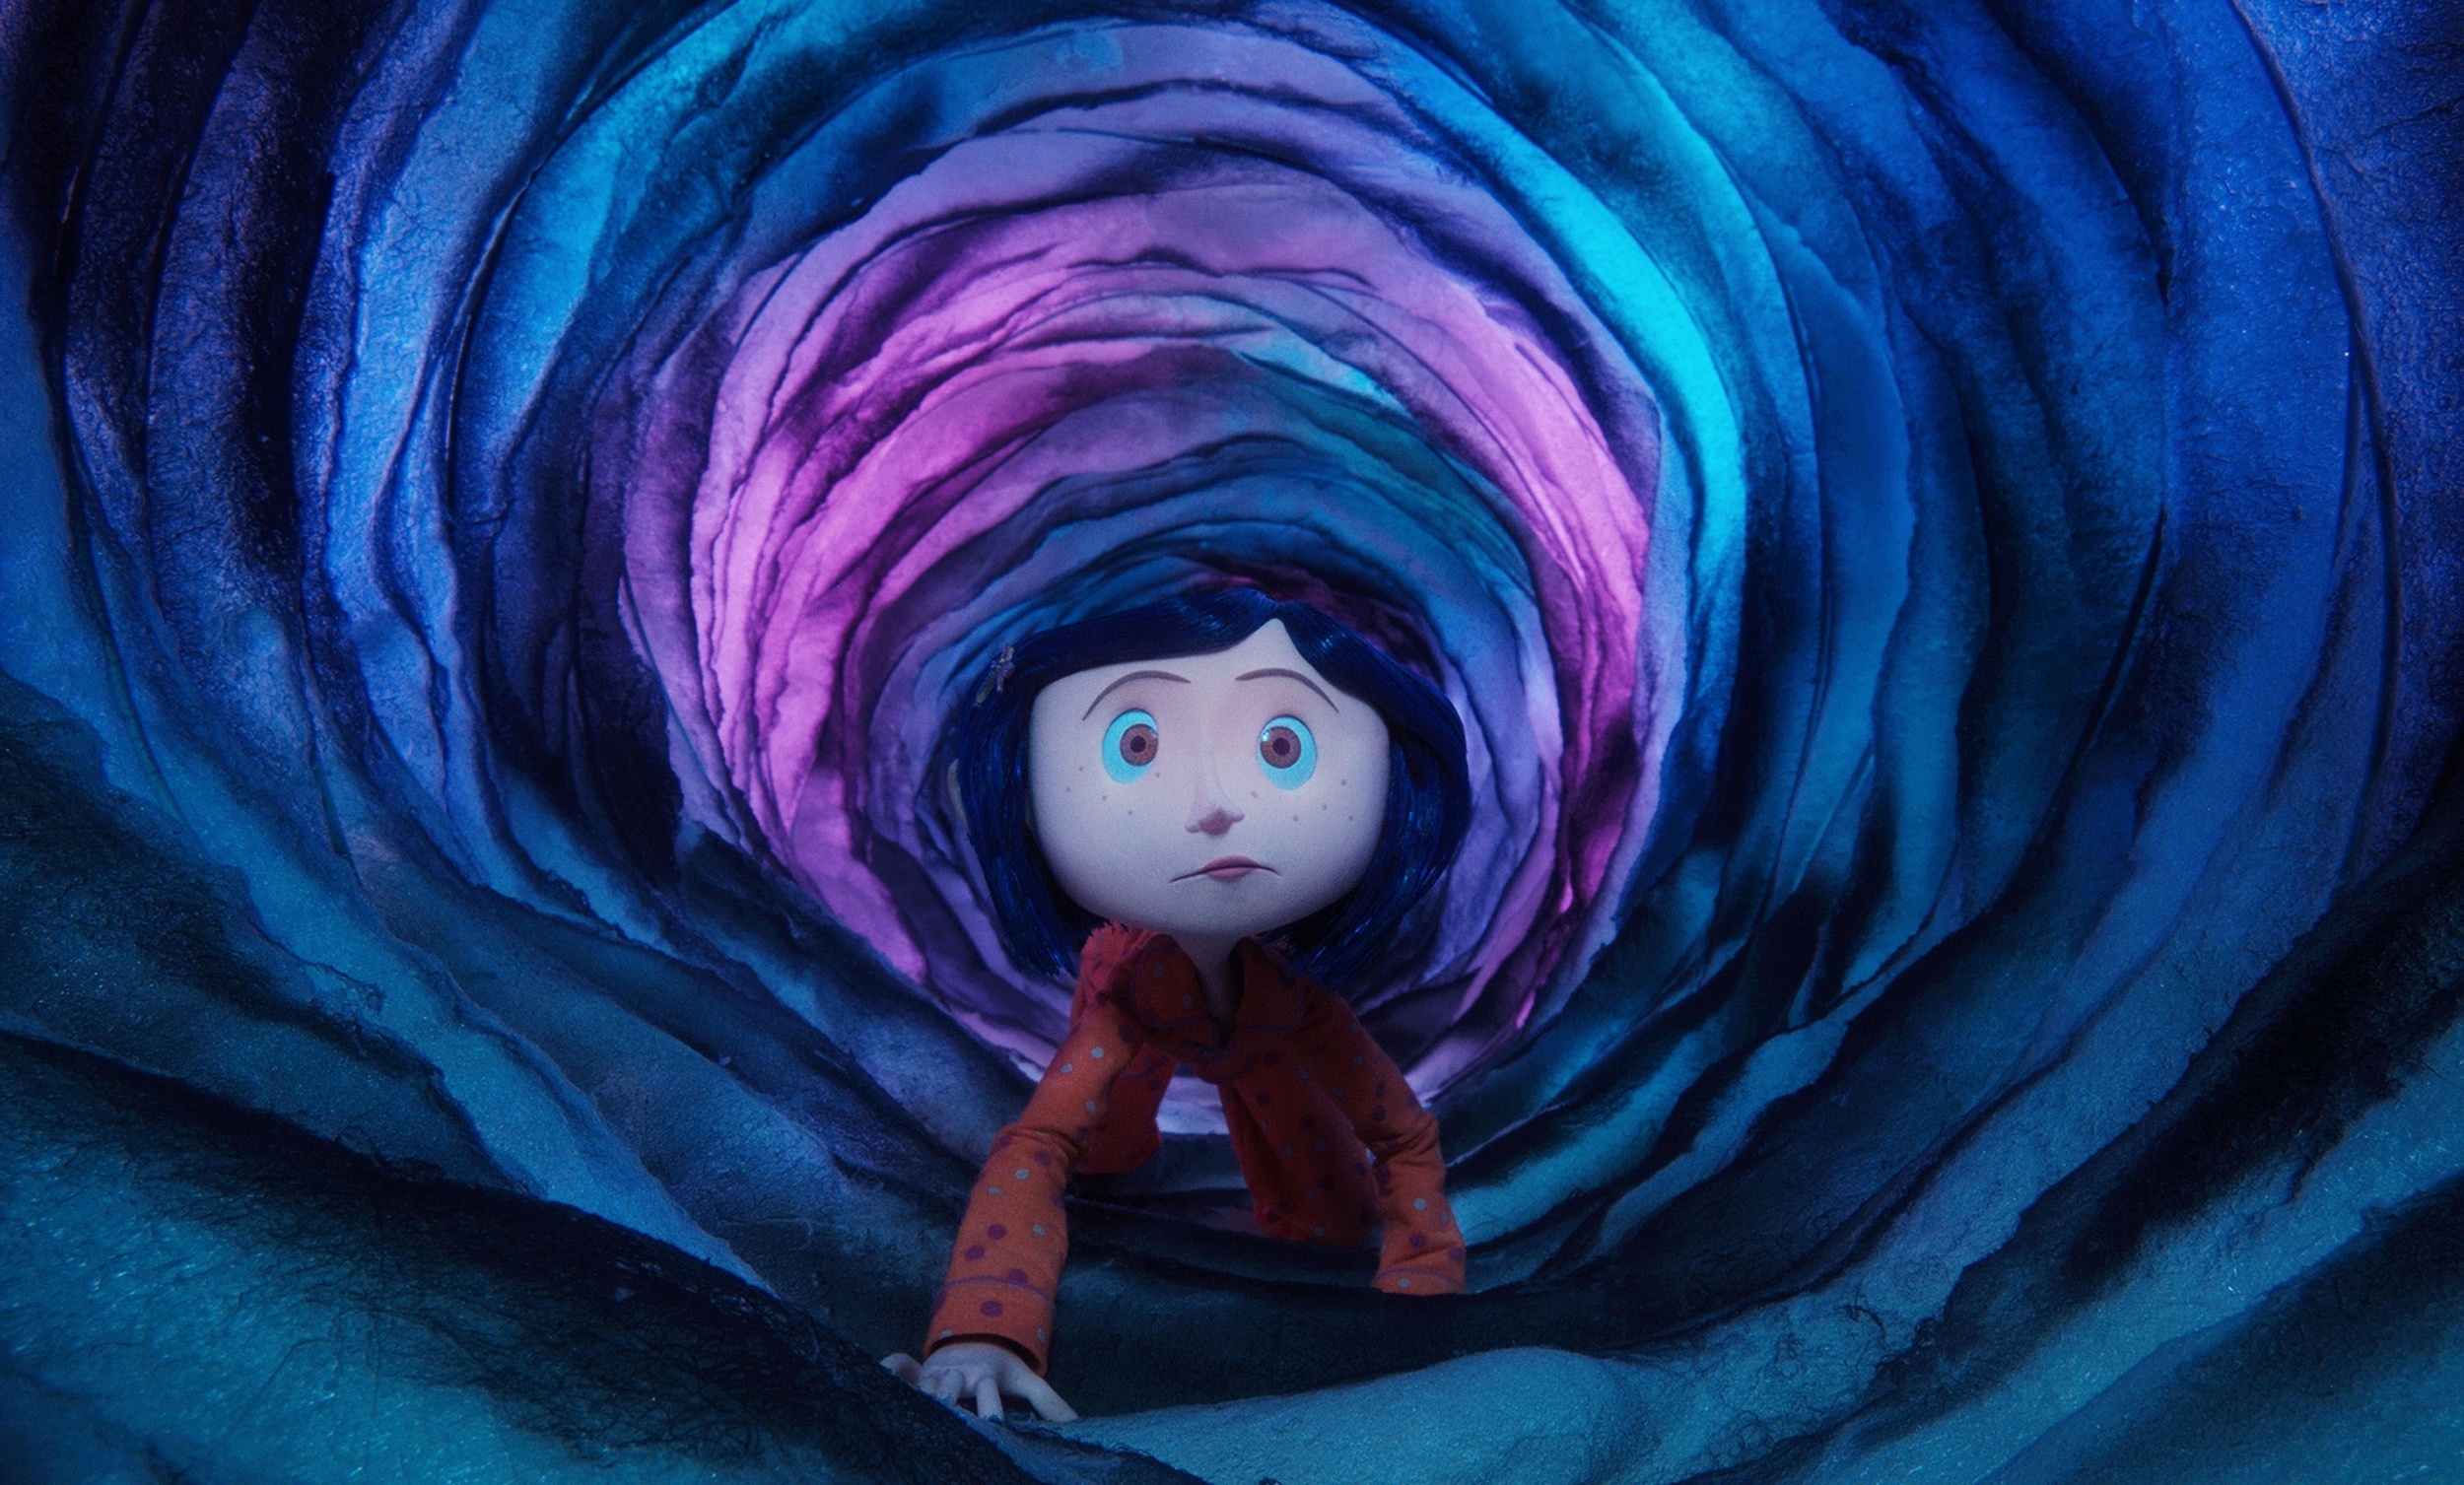 <p>Based on the novel by Neil Gaiman, <em>Coraline</em> is one of the most popular stop-motion animated films of all time. The story follows a young girl who discovers a door in her home that leads to an idealized version of her frustrating life, but everything is not what it seems. <em>Coraline</em> pushes the boundaries for a children’s film with its super creepy storyline and characters. However, it is also brimming with imagination and wonder, elevated by its meticulously crafted visuals. </p><p>You may also like: <a href='https://www.yardbarker.com/entertainment/articles/all_apologies_the_20_best_make_up_songs_022924/s1__38322730'>All apologies: The 20 best make-up songs</a></p>